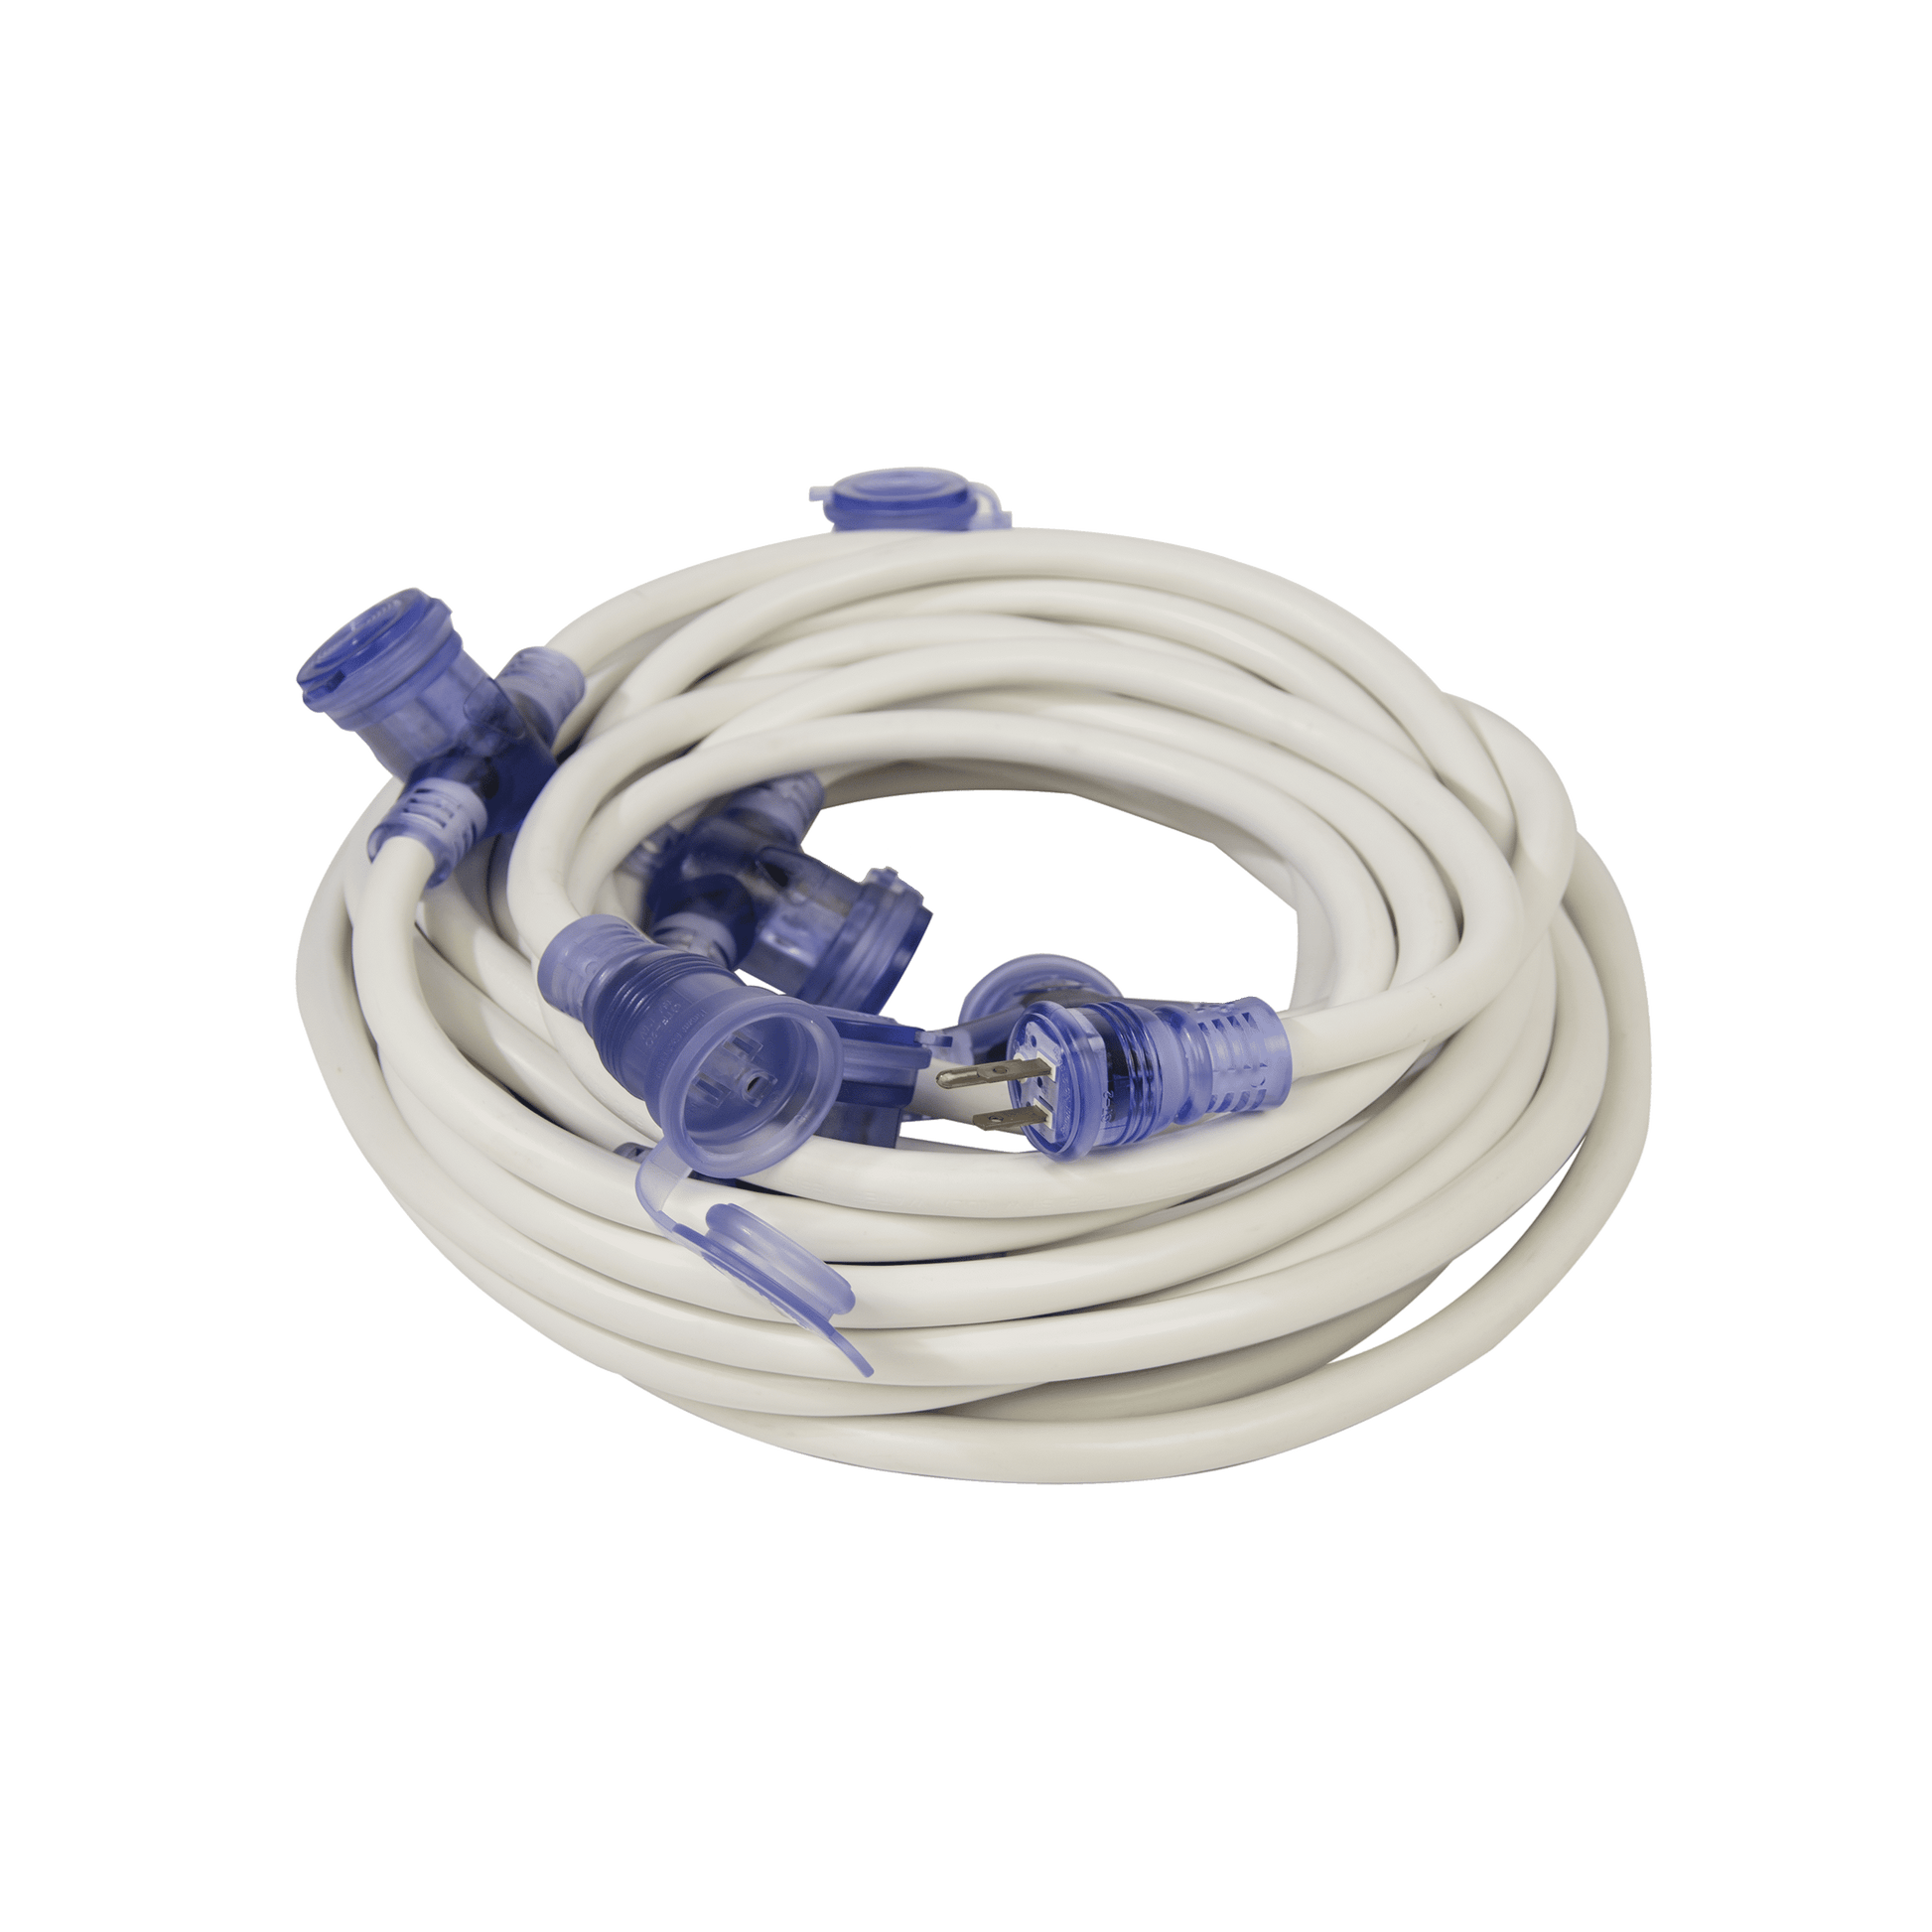 50 Foot Pro Cap 6 Multi-Outlet Single Lighted Extension Cord 50 ft / 12 Gauge / White